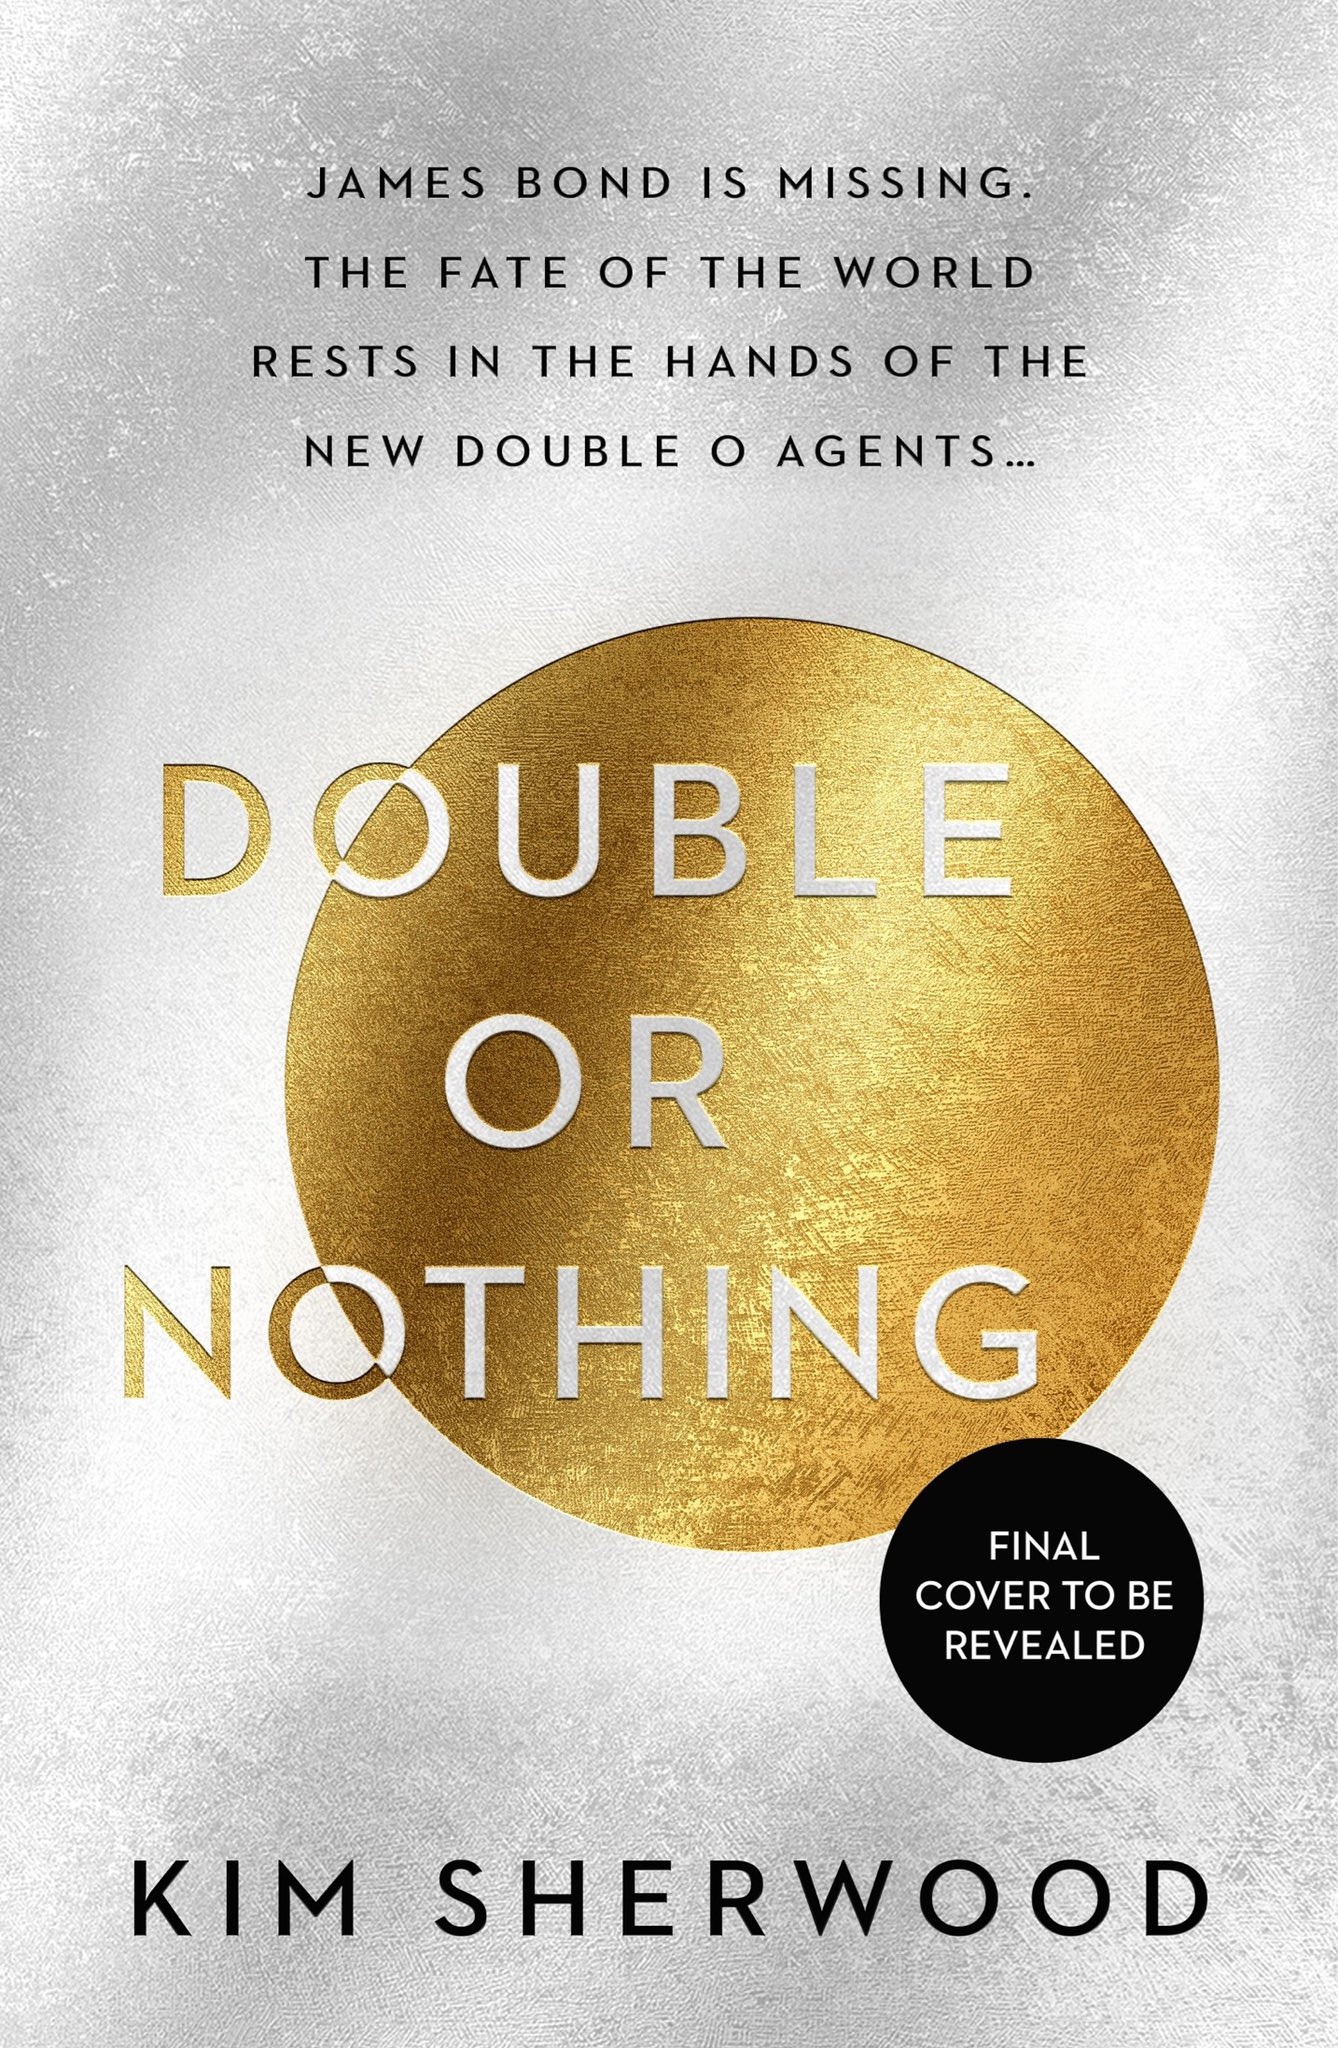 Double-or-Nothing-by-Kim-Sherwood.jpg